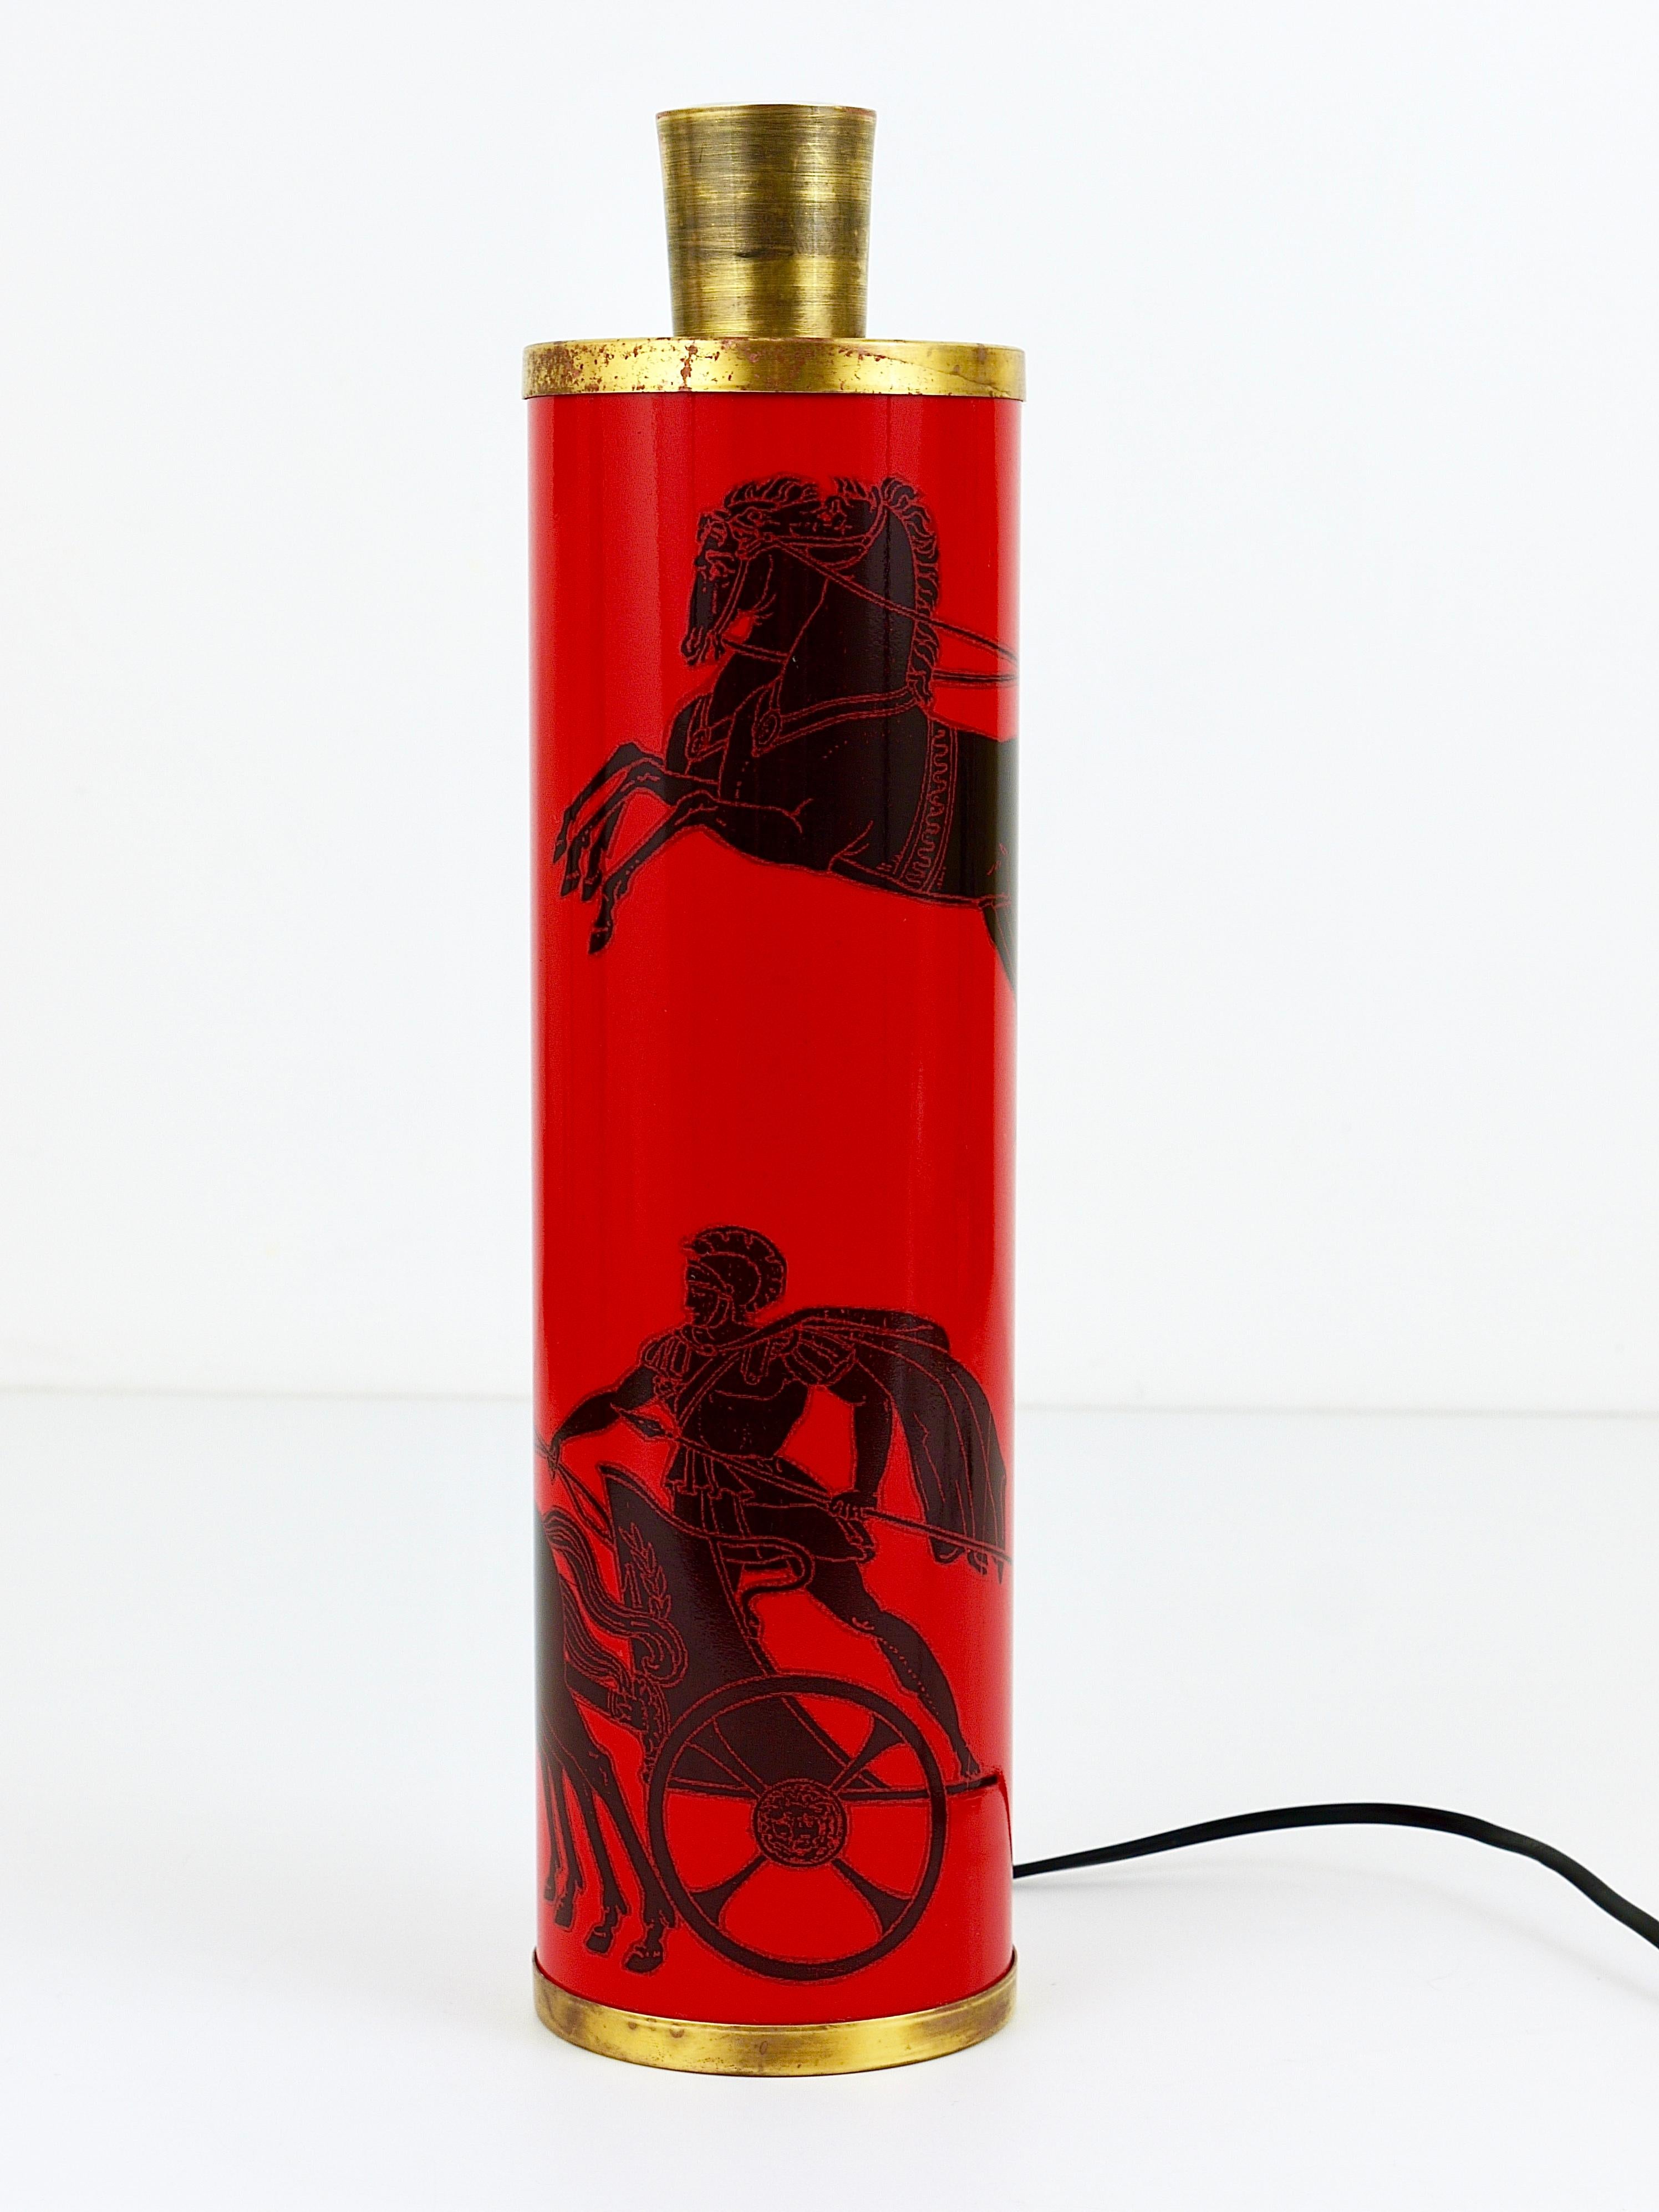 Italian Red and Black Piero Fornasetti Greek Warrior MidCentury Table Lamp, Italy, 1950s For Sale